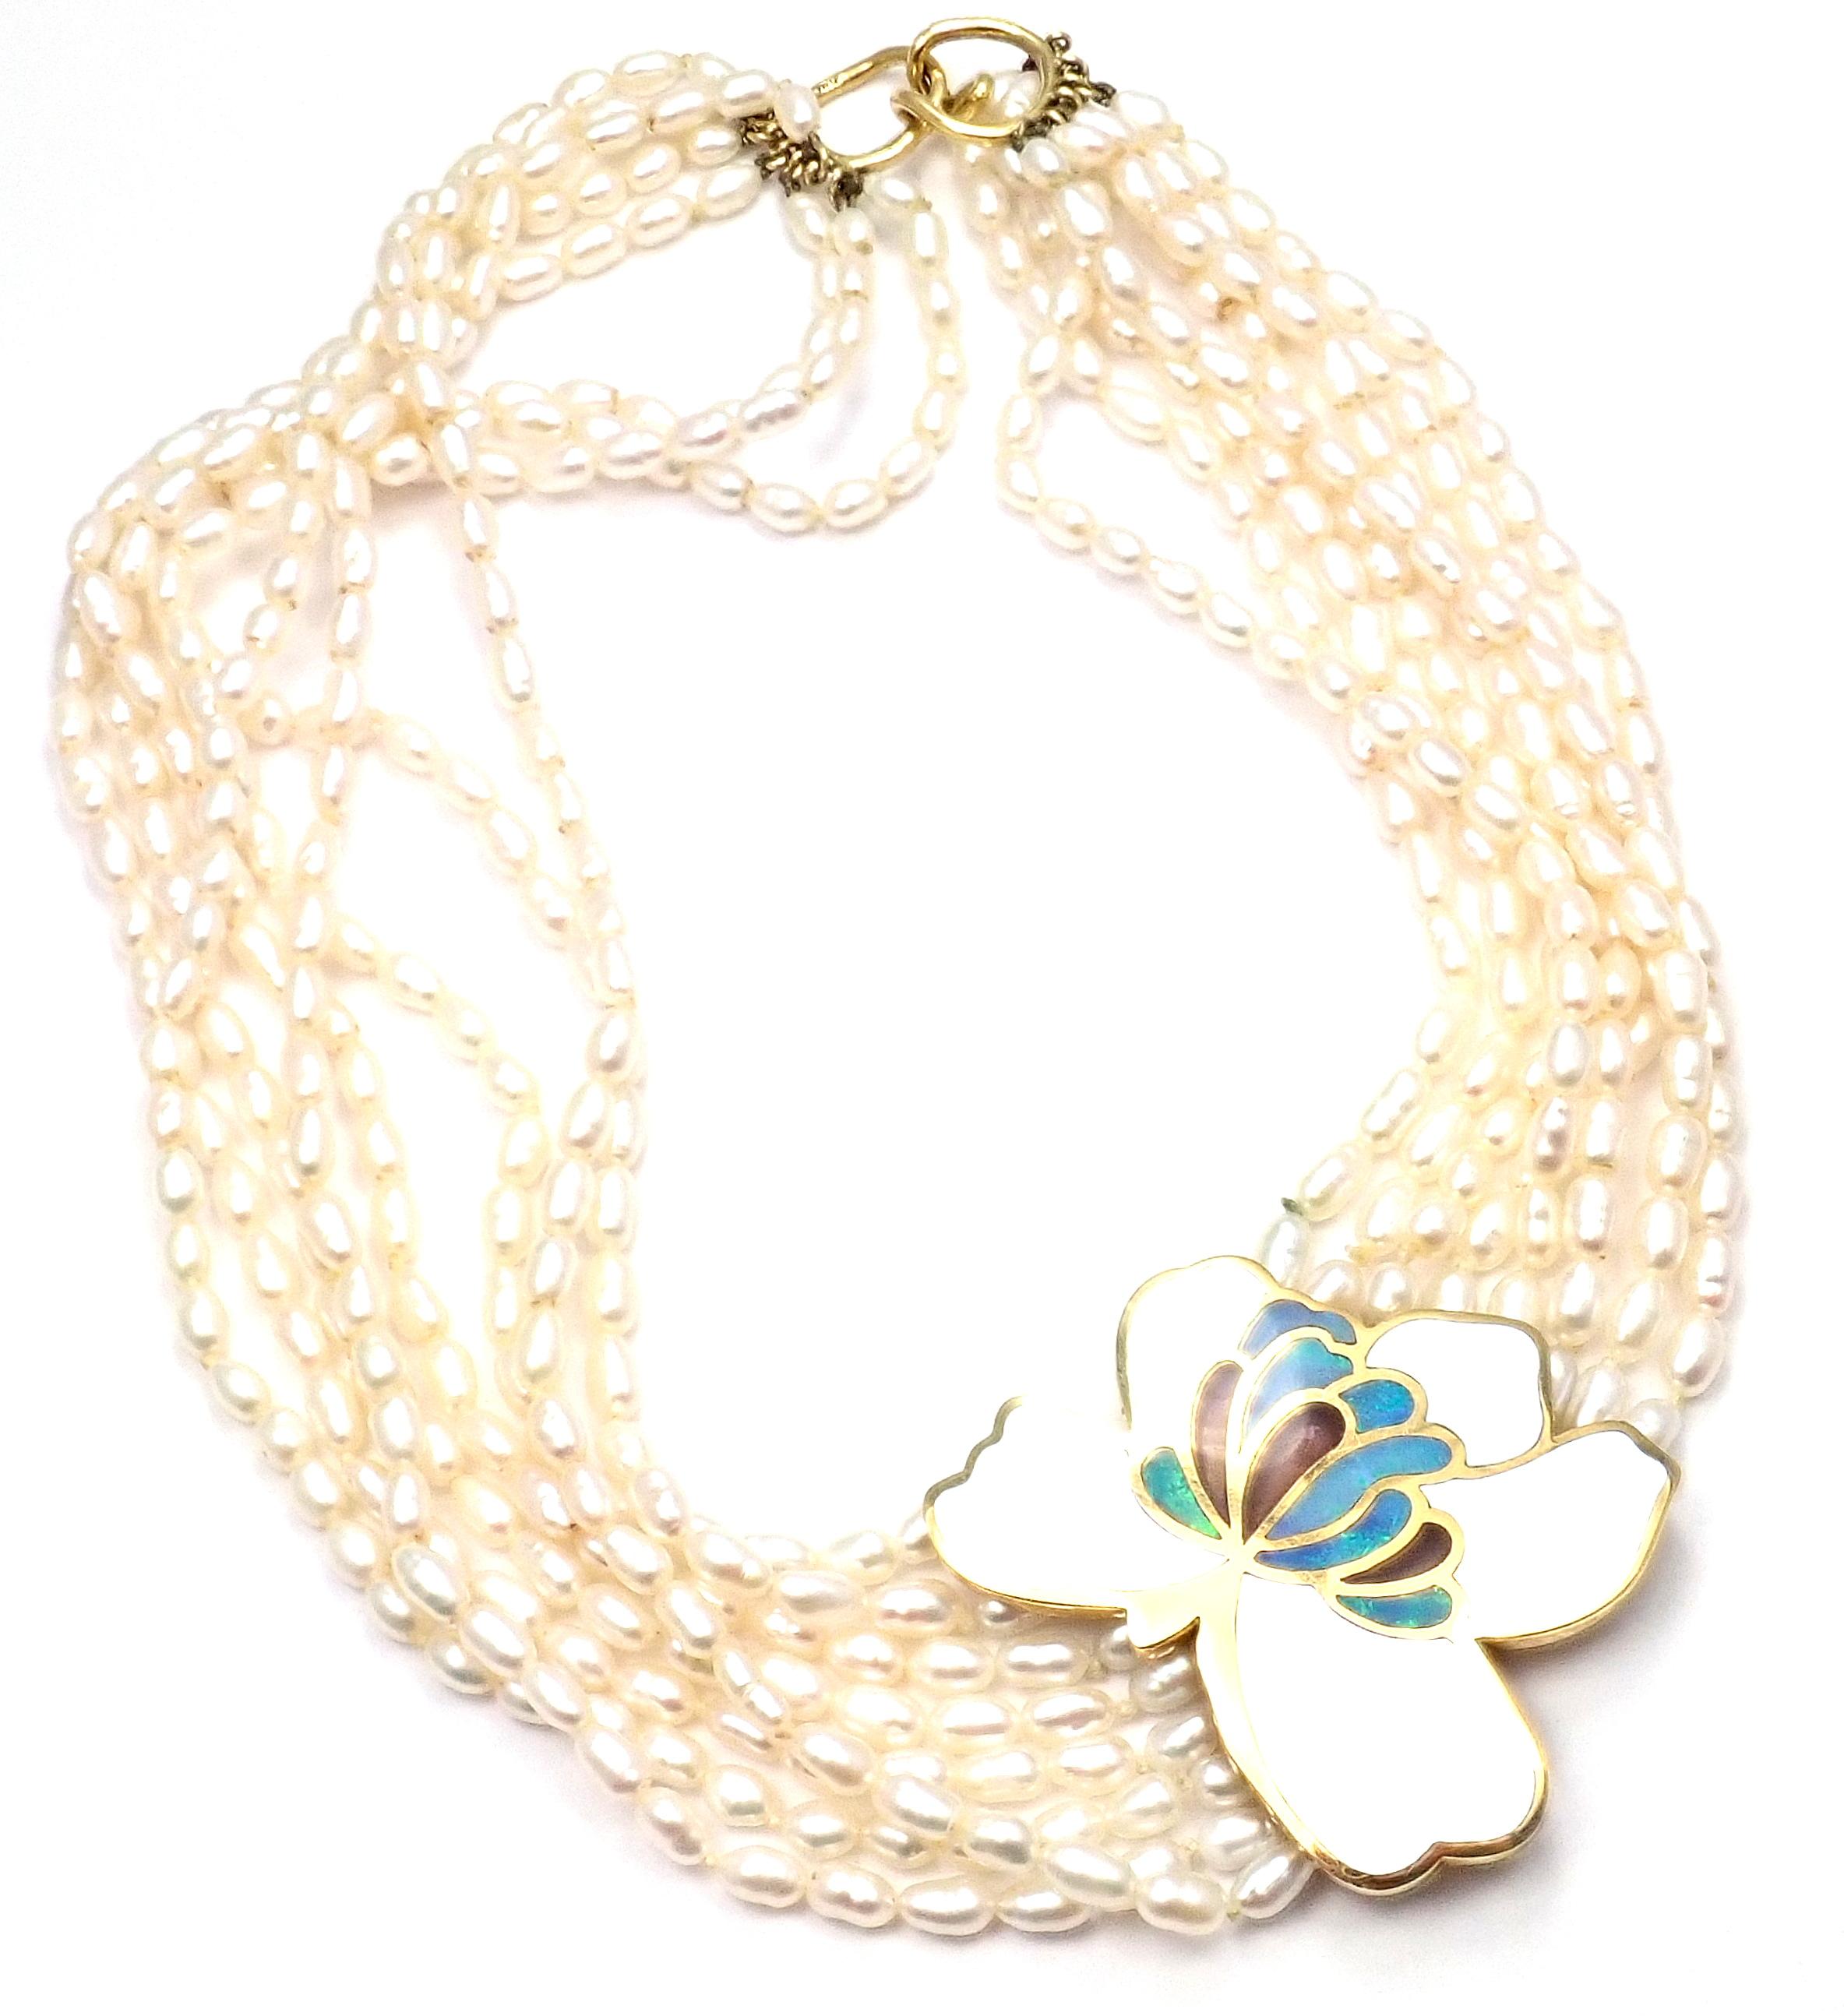 18k Yellow Gold Inlaid Mother Of Pearl, Opal, Black Jade Flower Pendant Necklace by 
Tiffany & Co.
With Inlaid Mother Of Pearl, Opal, Black Jade
And 8 rows of 4.5mm fresh water pearls
Details: 
Weight: 101.9 grams
Length: 17